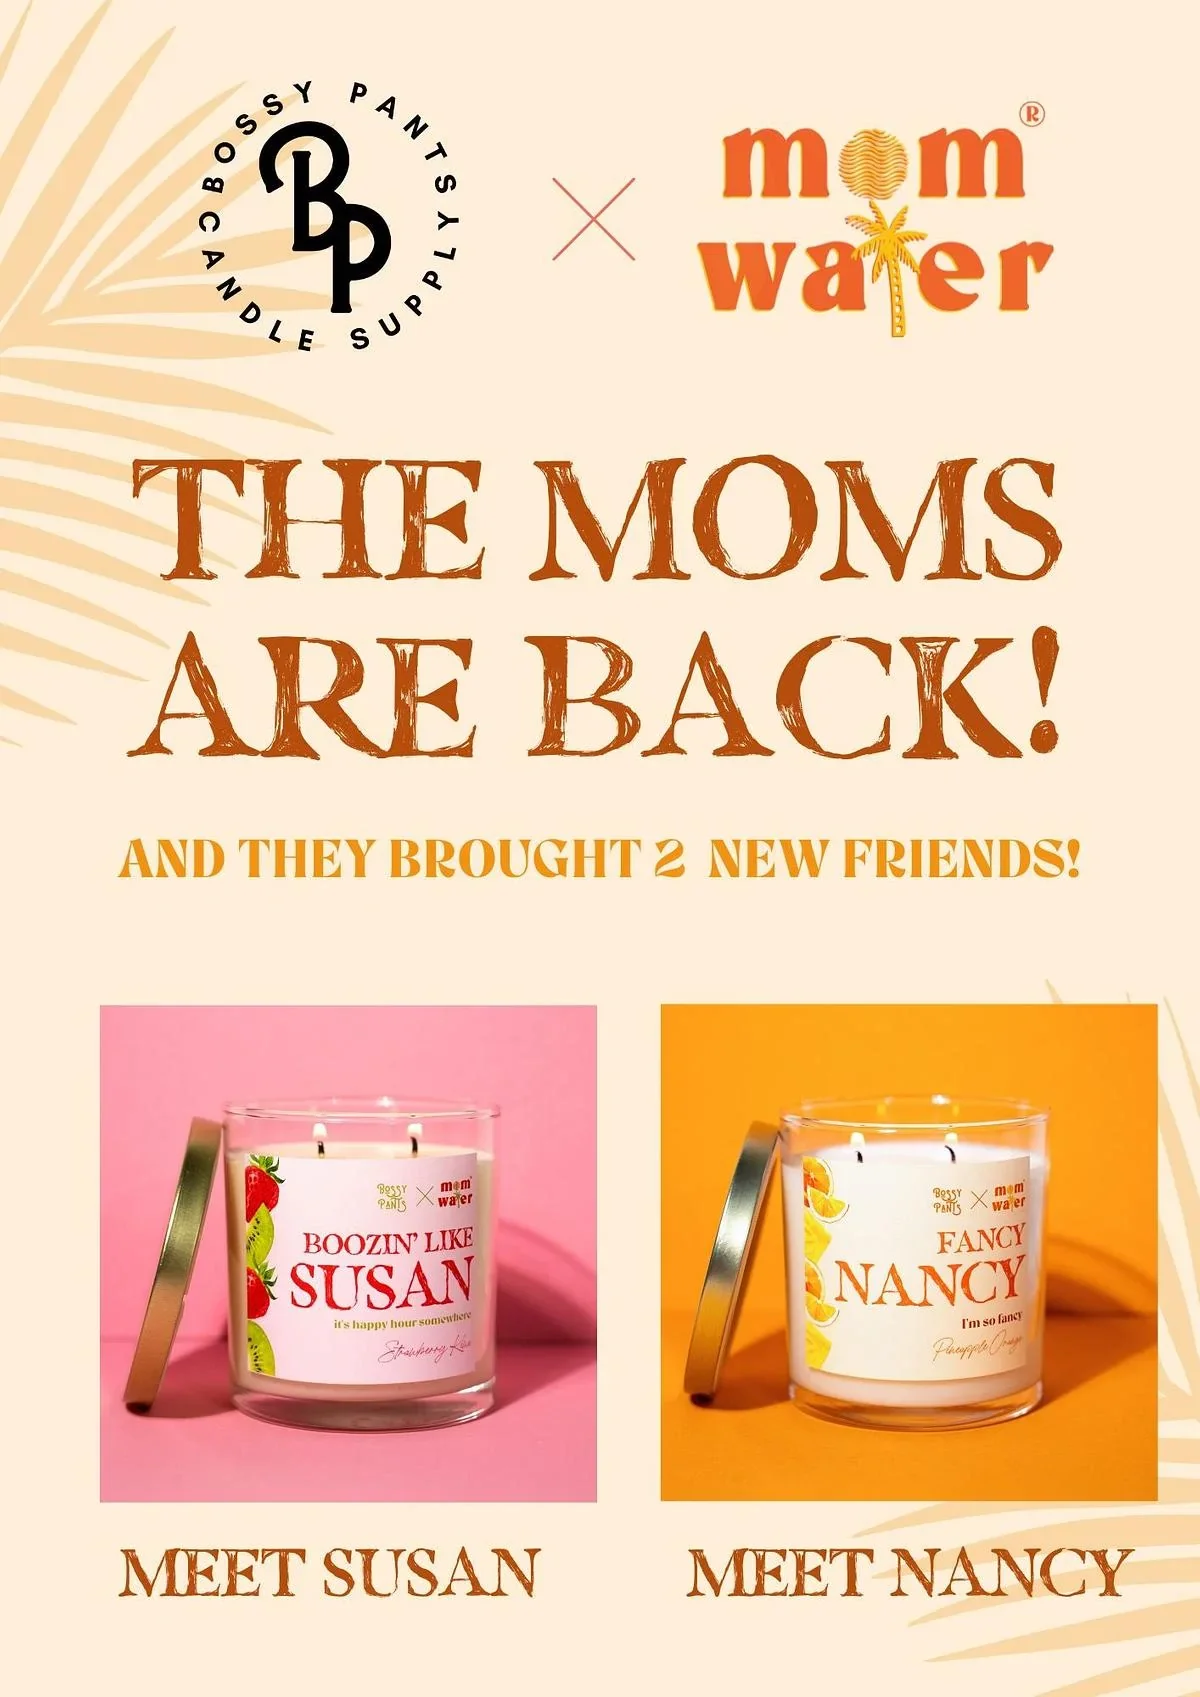 MOM WATER X BOSSY PANTS CANDLES ARE BACK